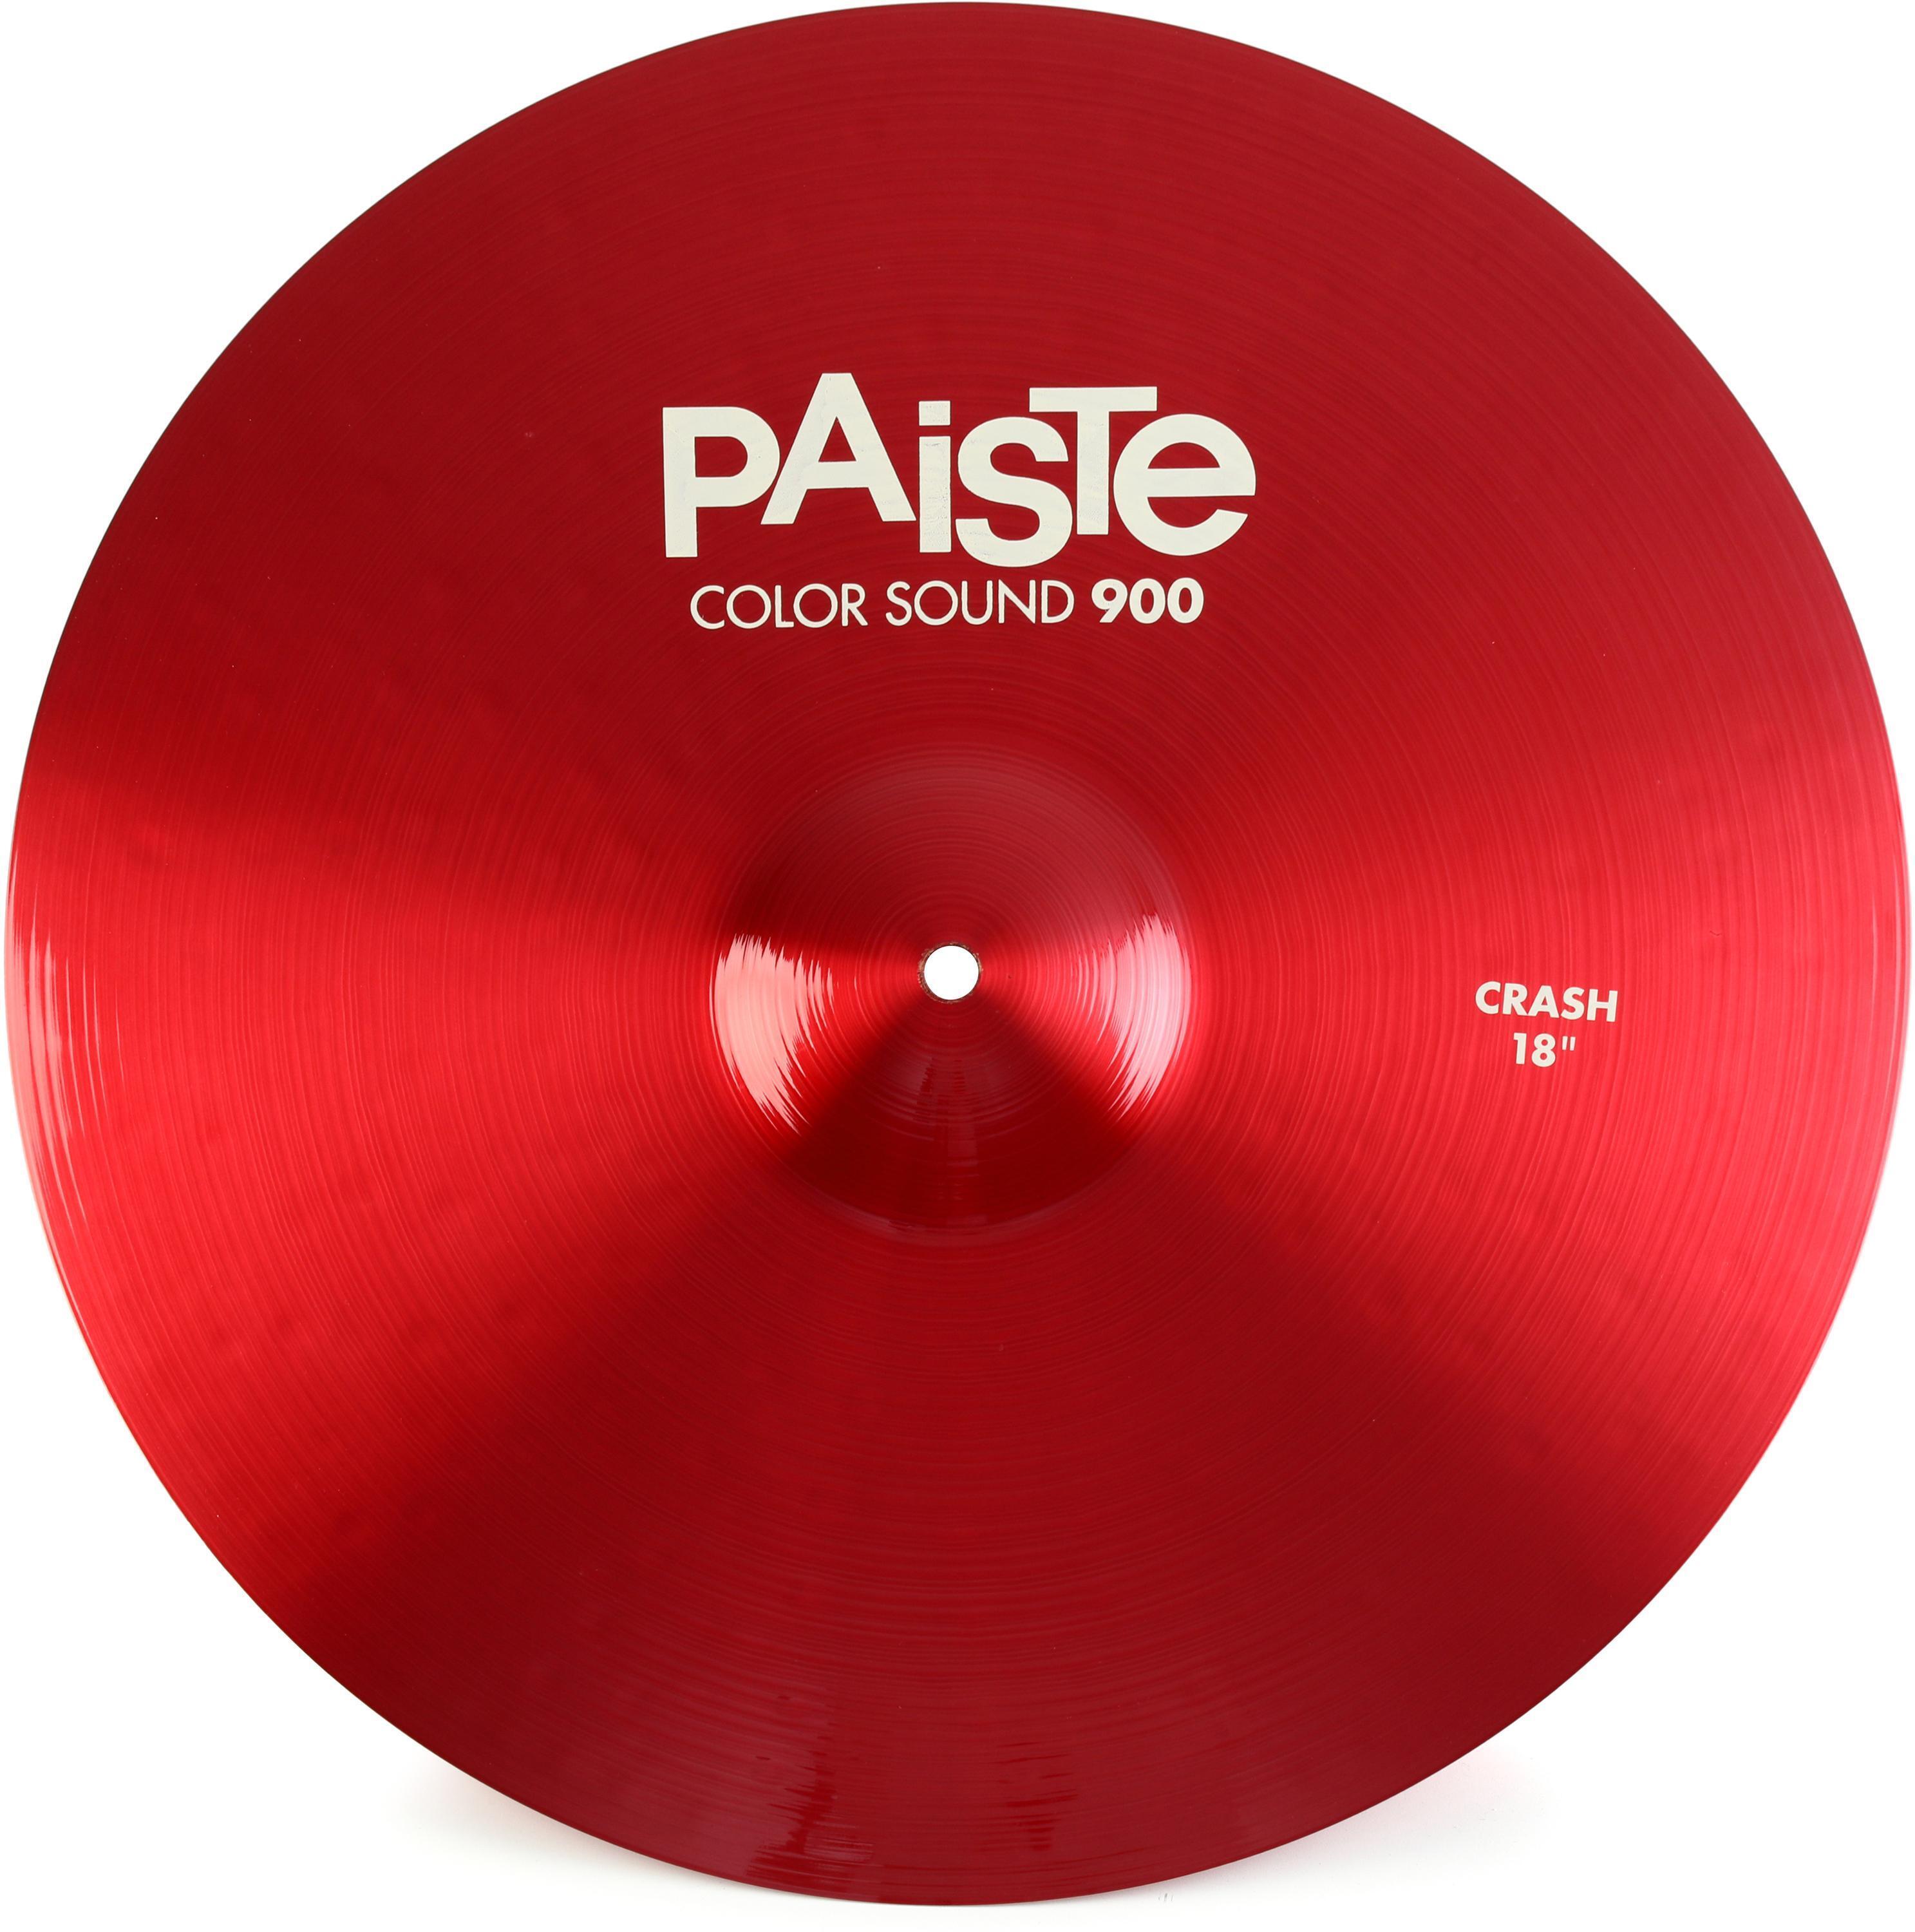 Paiste 18 inch Color Sound 900 Red Crash Cymbal | Sweetwater